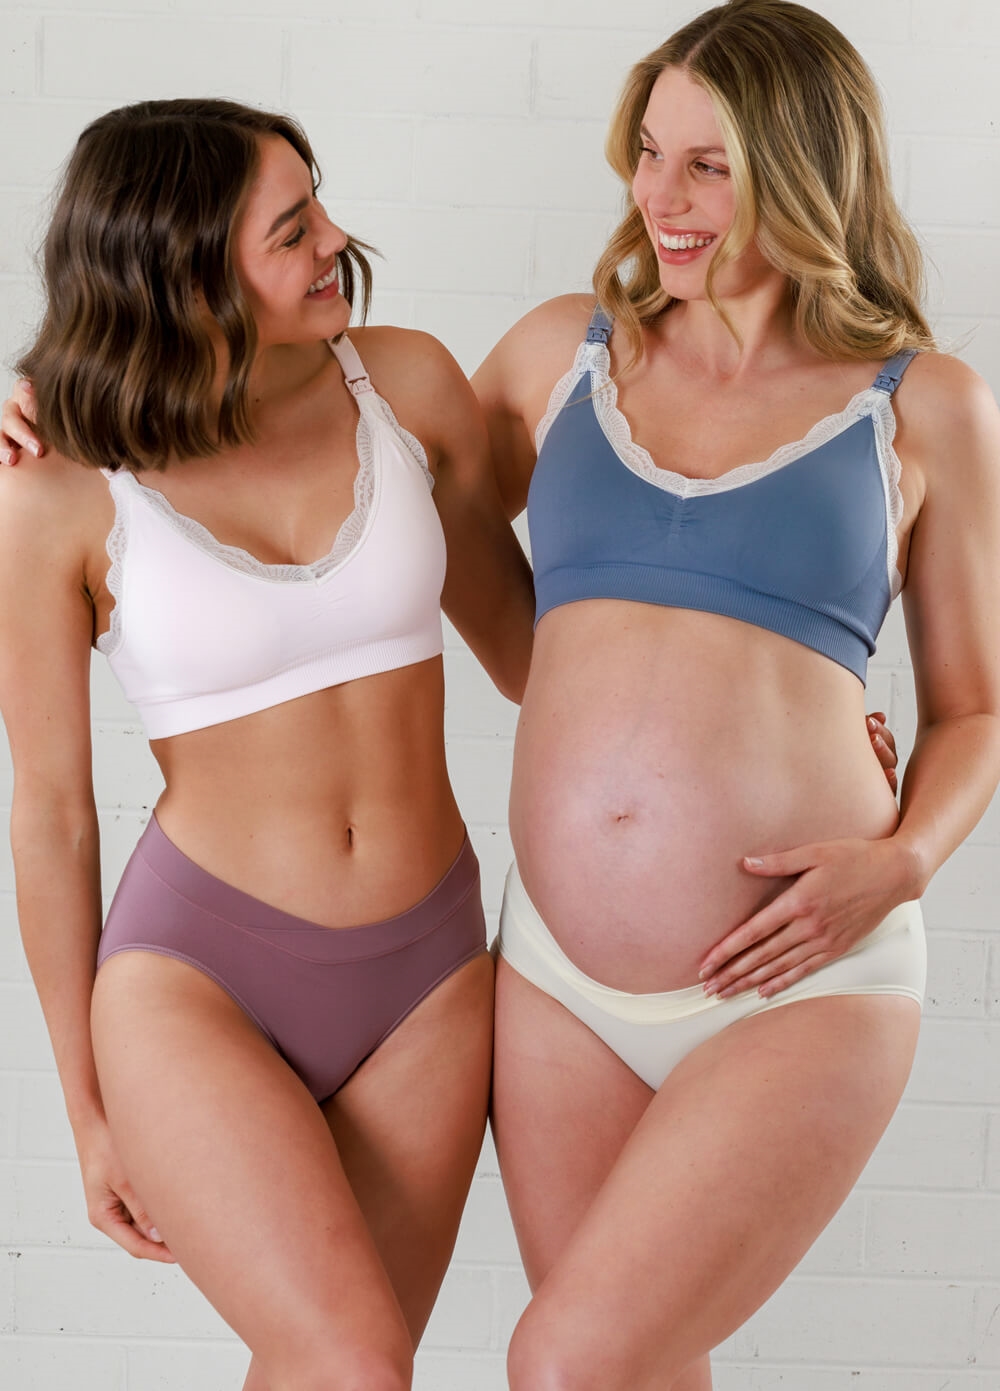 Pack of 2 ribbed nursing bras - Maternity - CLOTHING - Woman